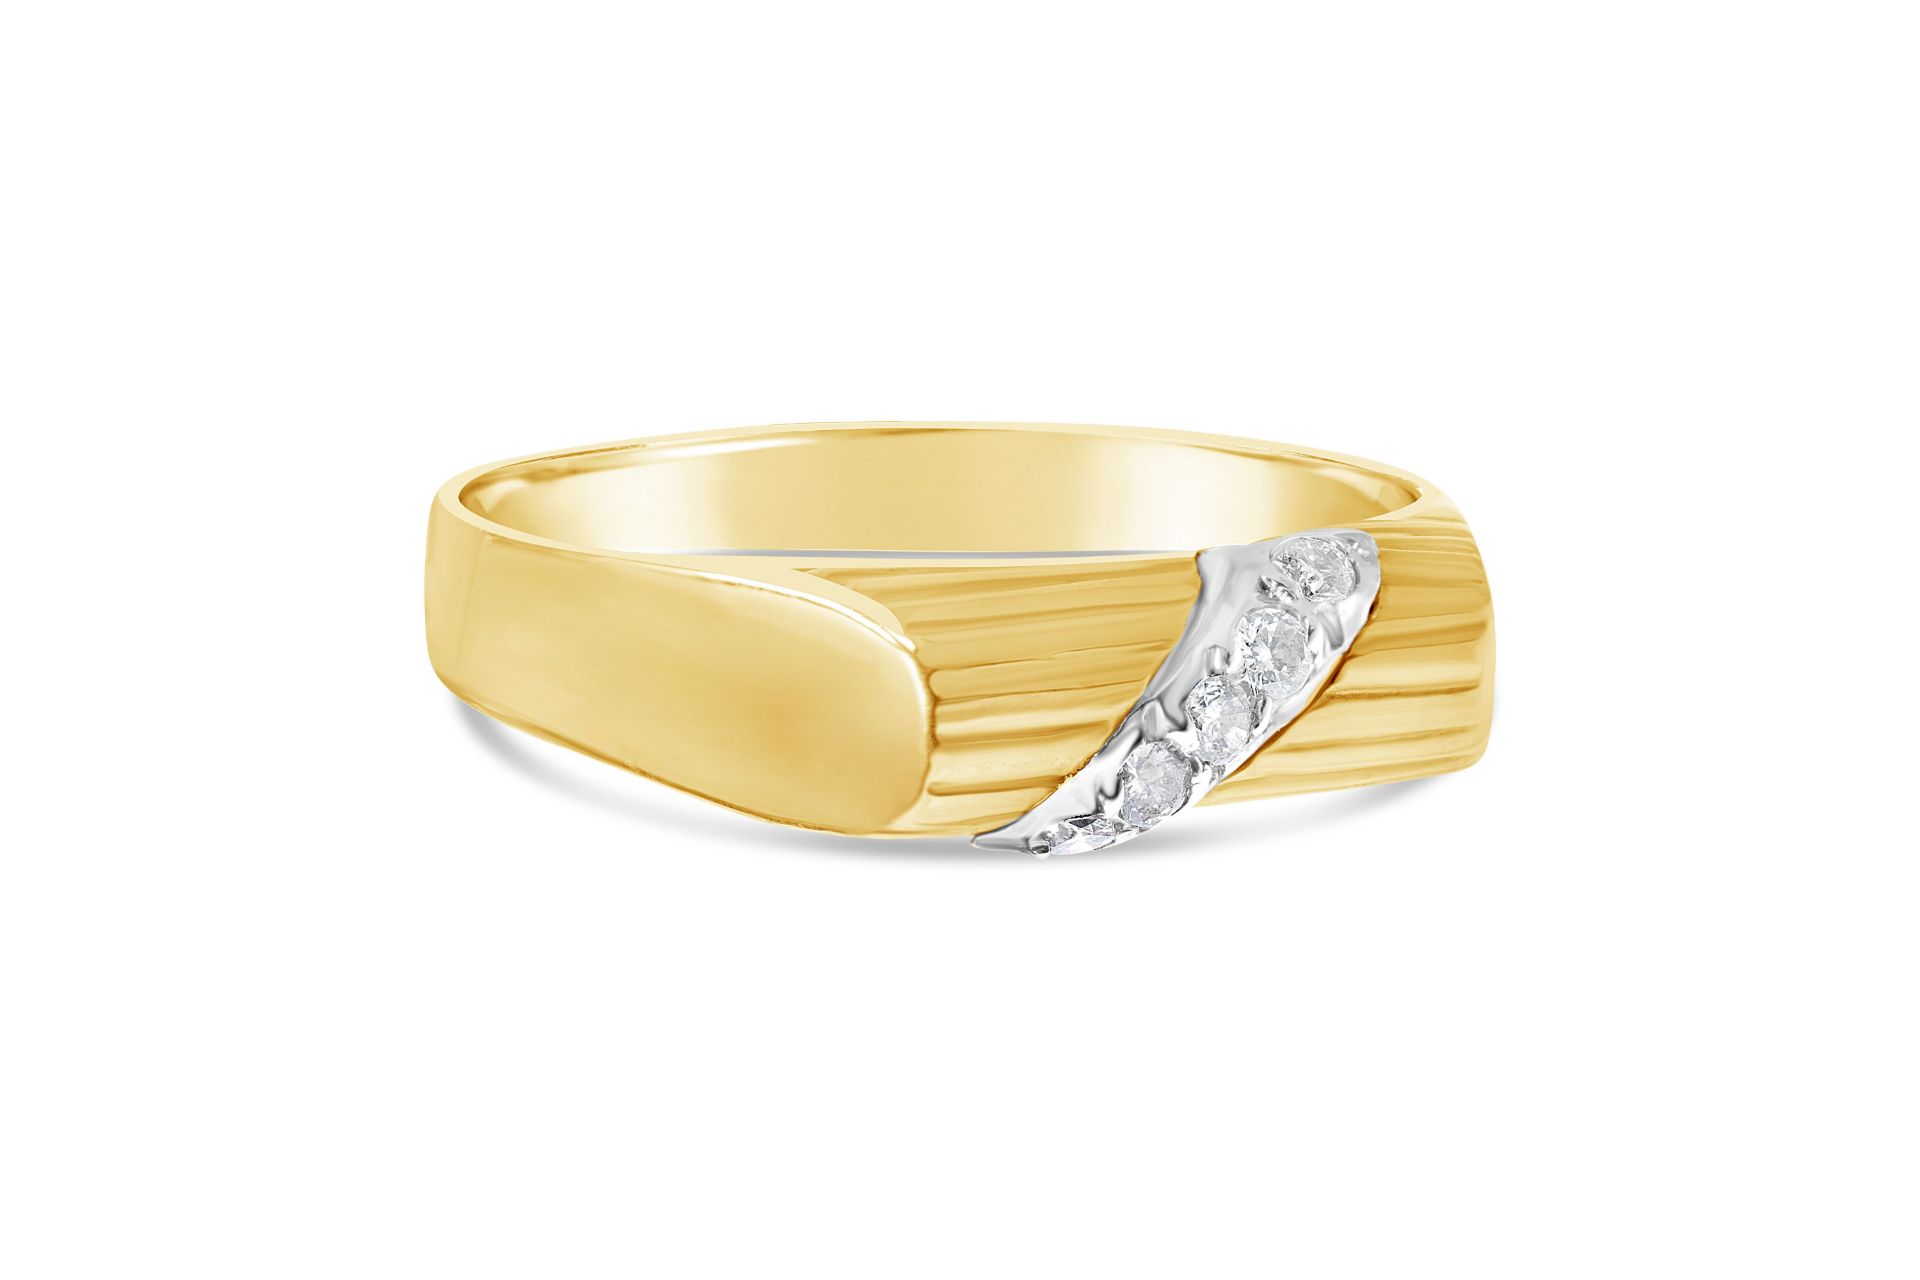 Diamond ring, Metal 9ct yellow gold, Weight 1.61, Diamond Weight (ct) 0.03, Colour H, Clarity SI2,